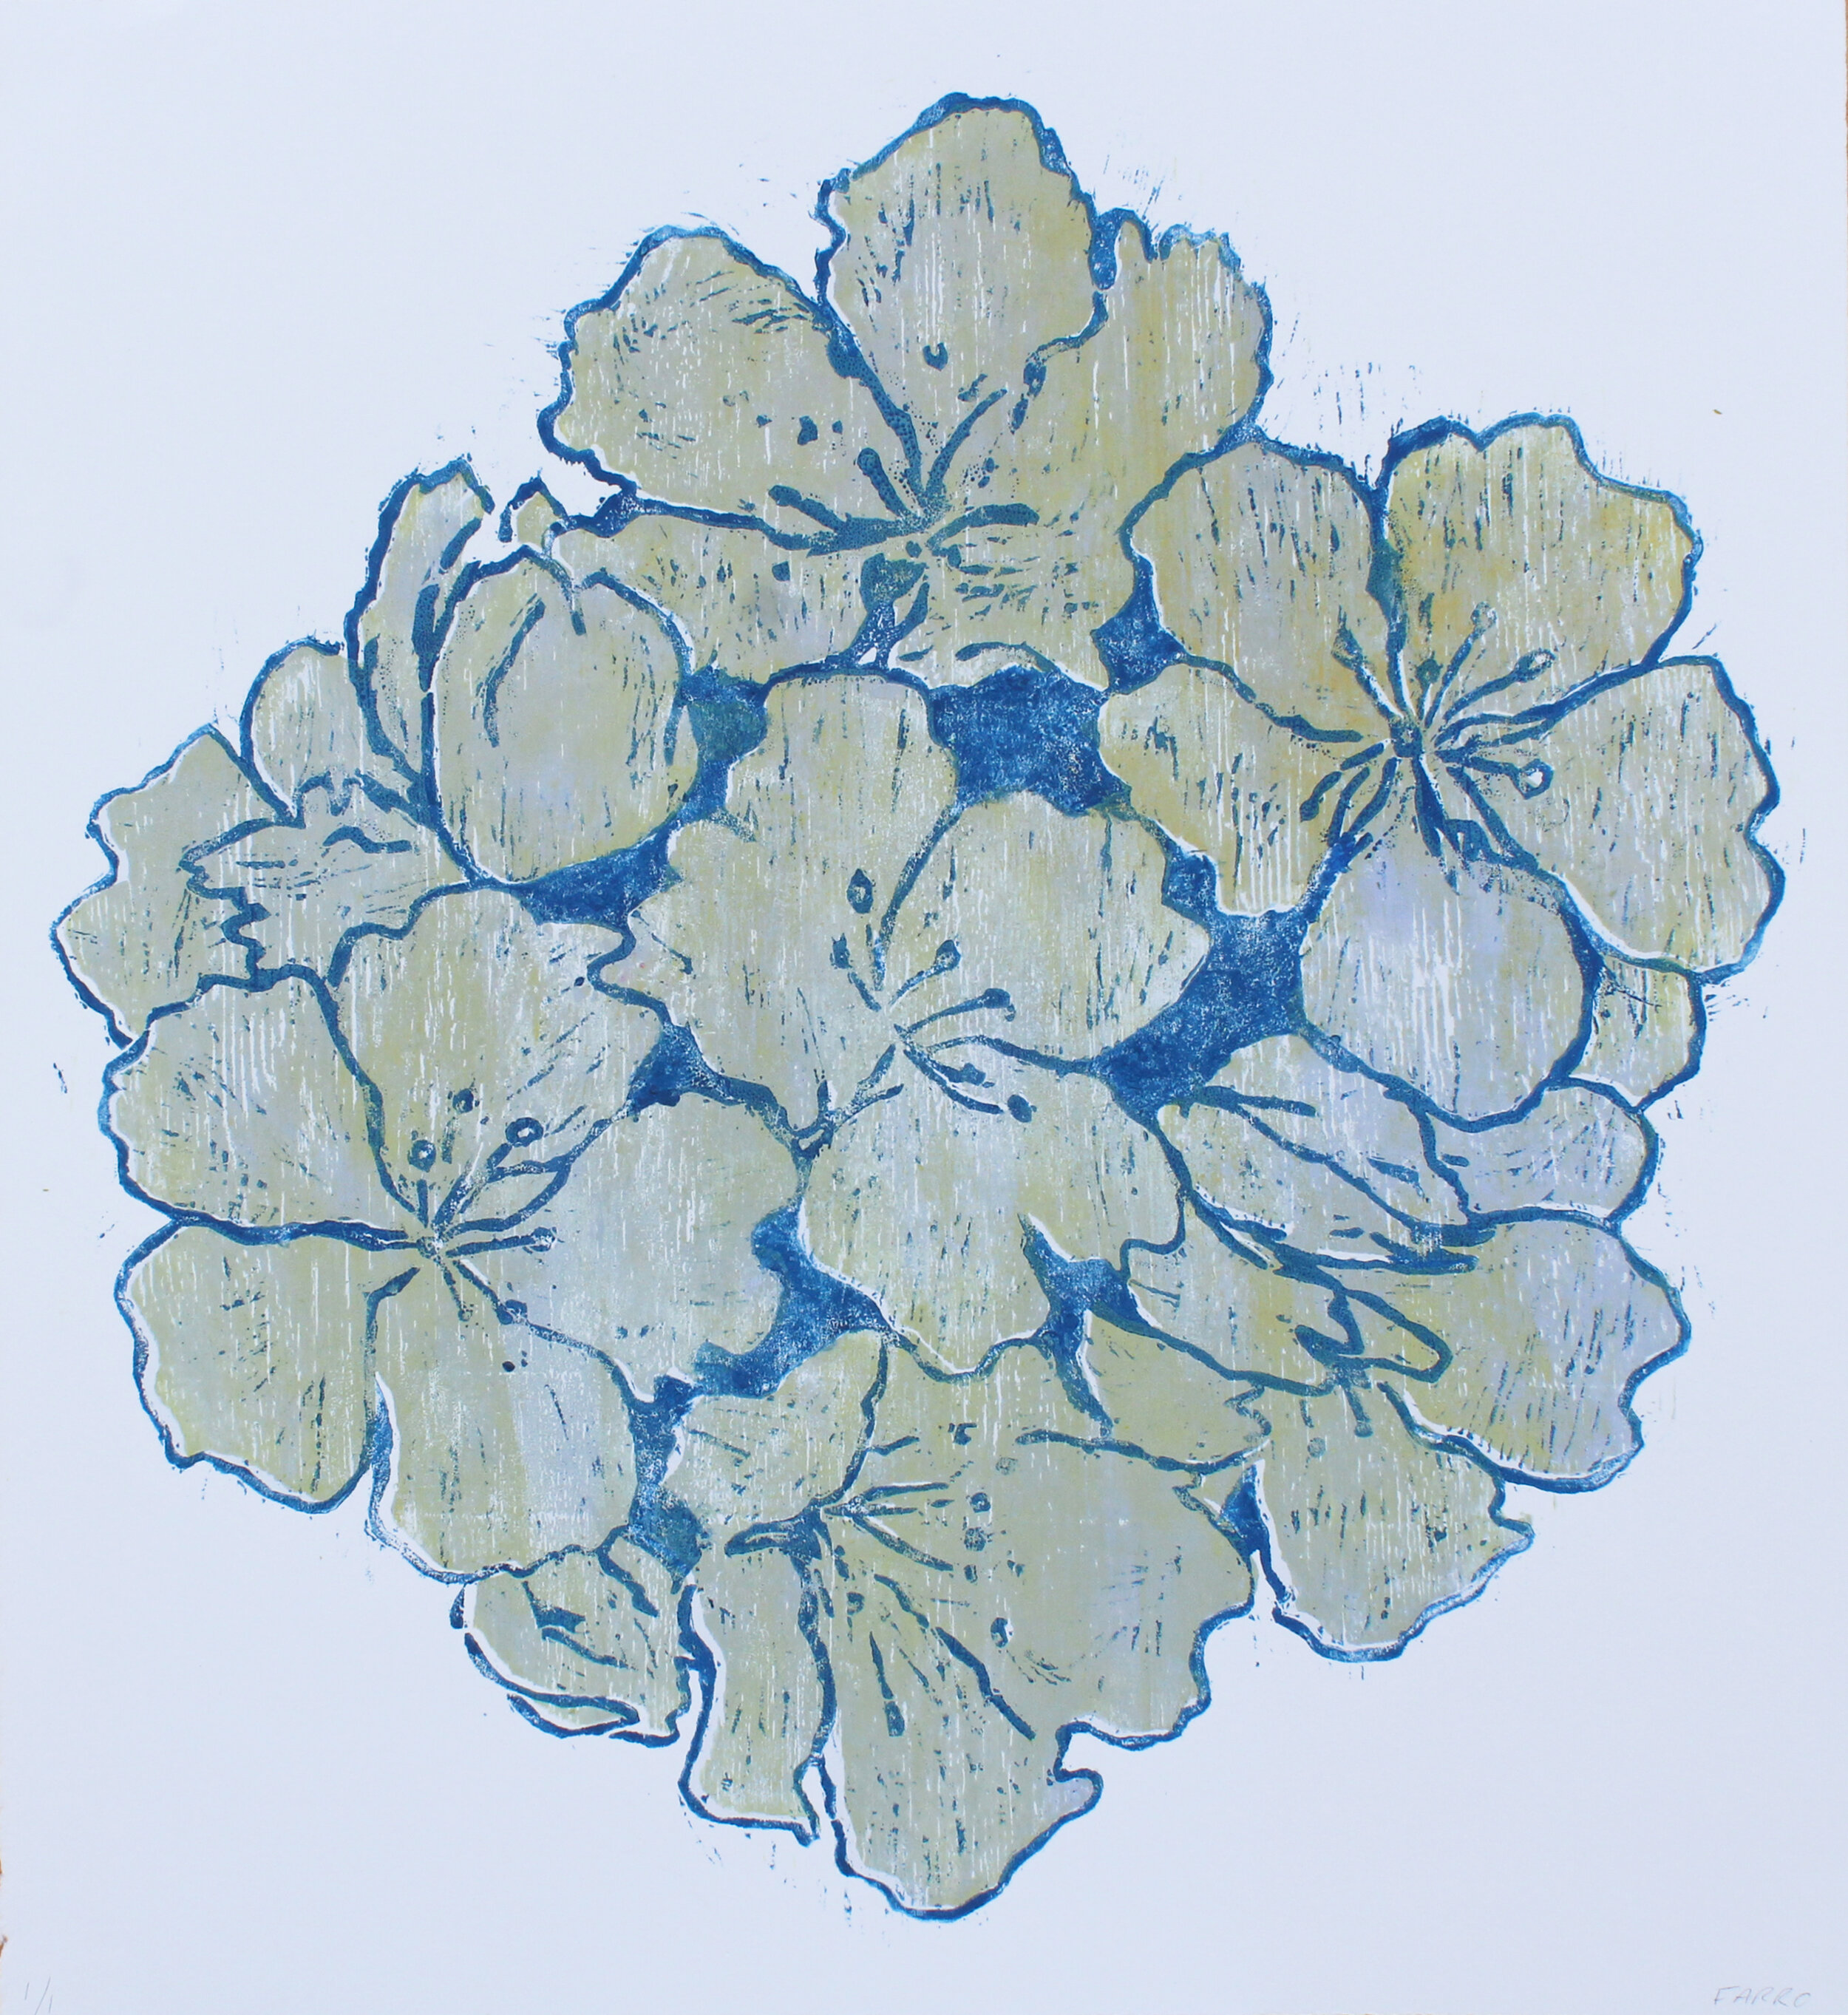   Moonlit Hibiscus  woodblock print edition of 1 16.5 x 17.5” 2019   purchase  